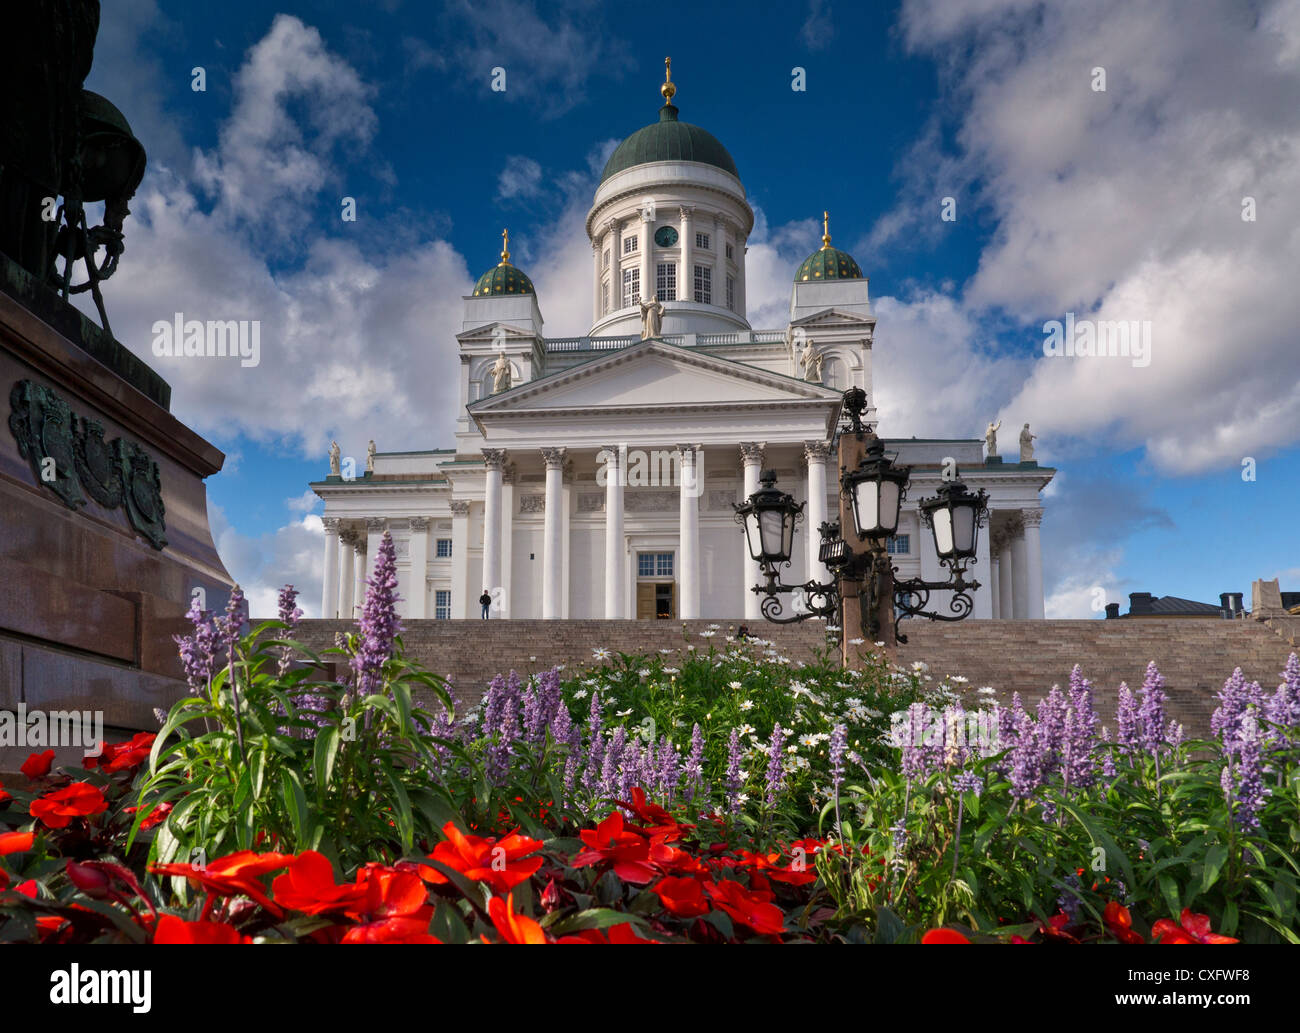 Helsinki Cathedral Senate Square with floral bedding plants in foreground  Helsinki Finland Stock Photo